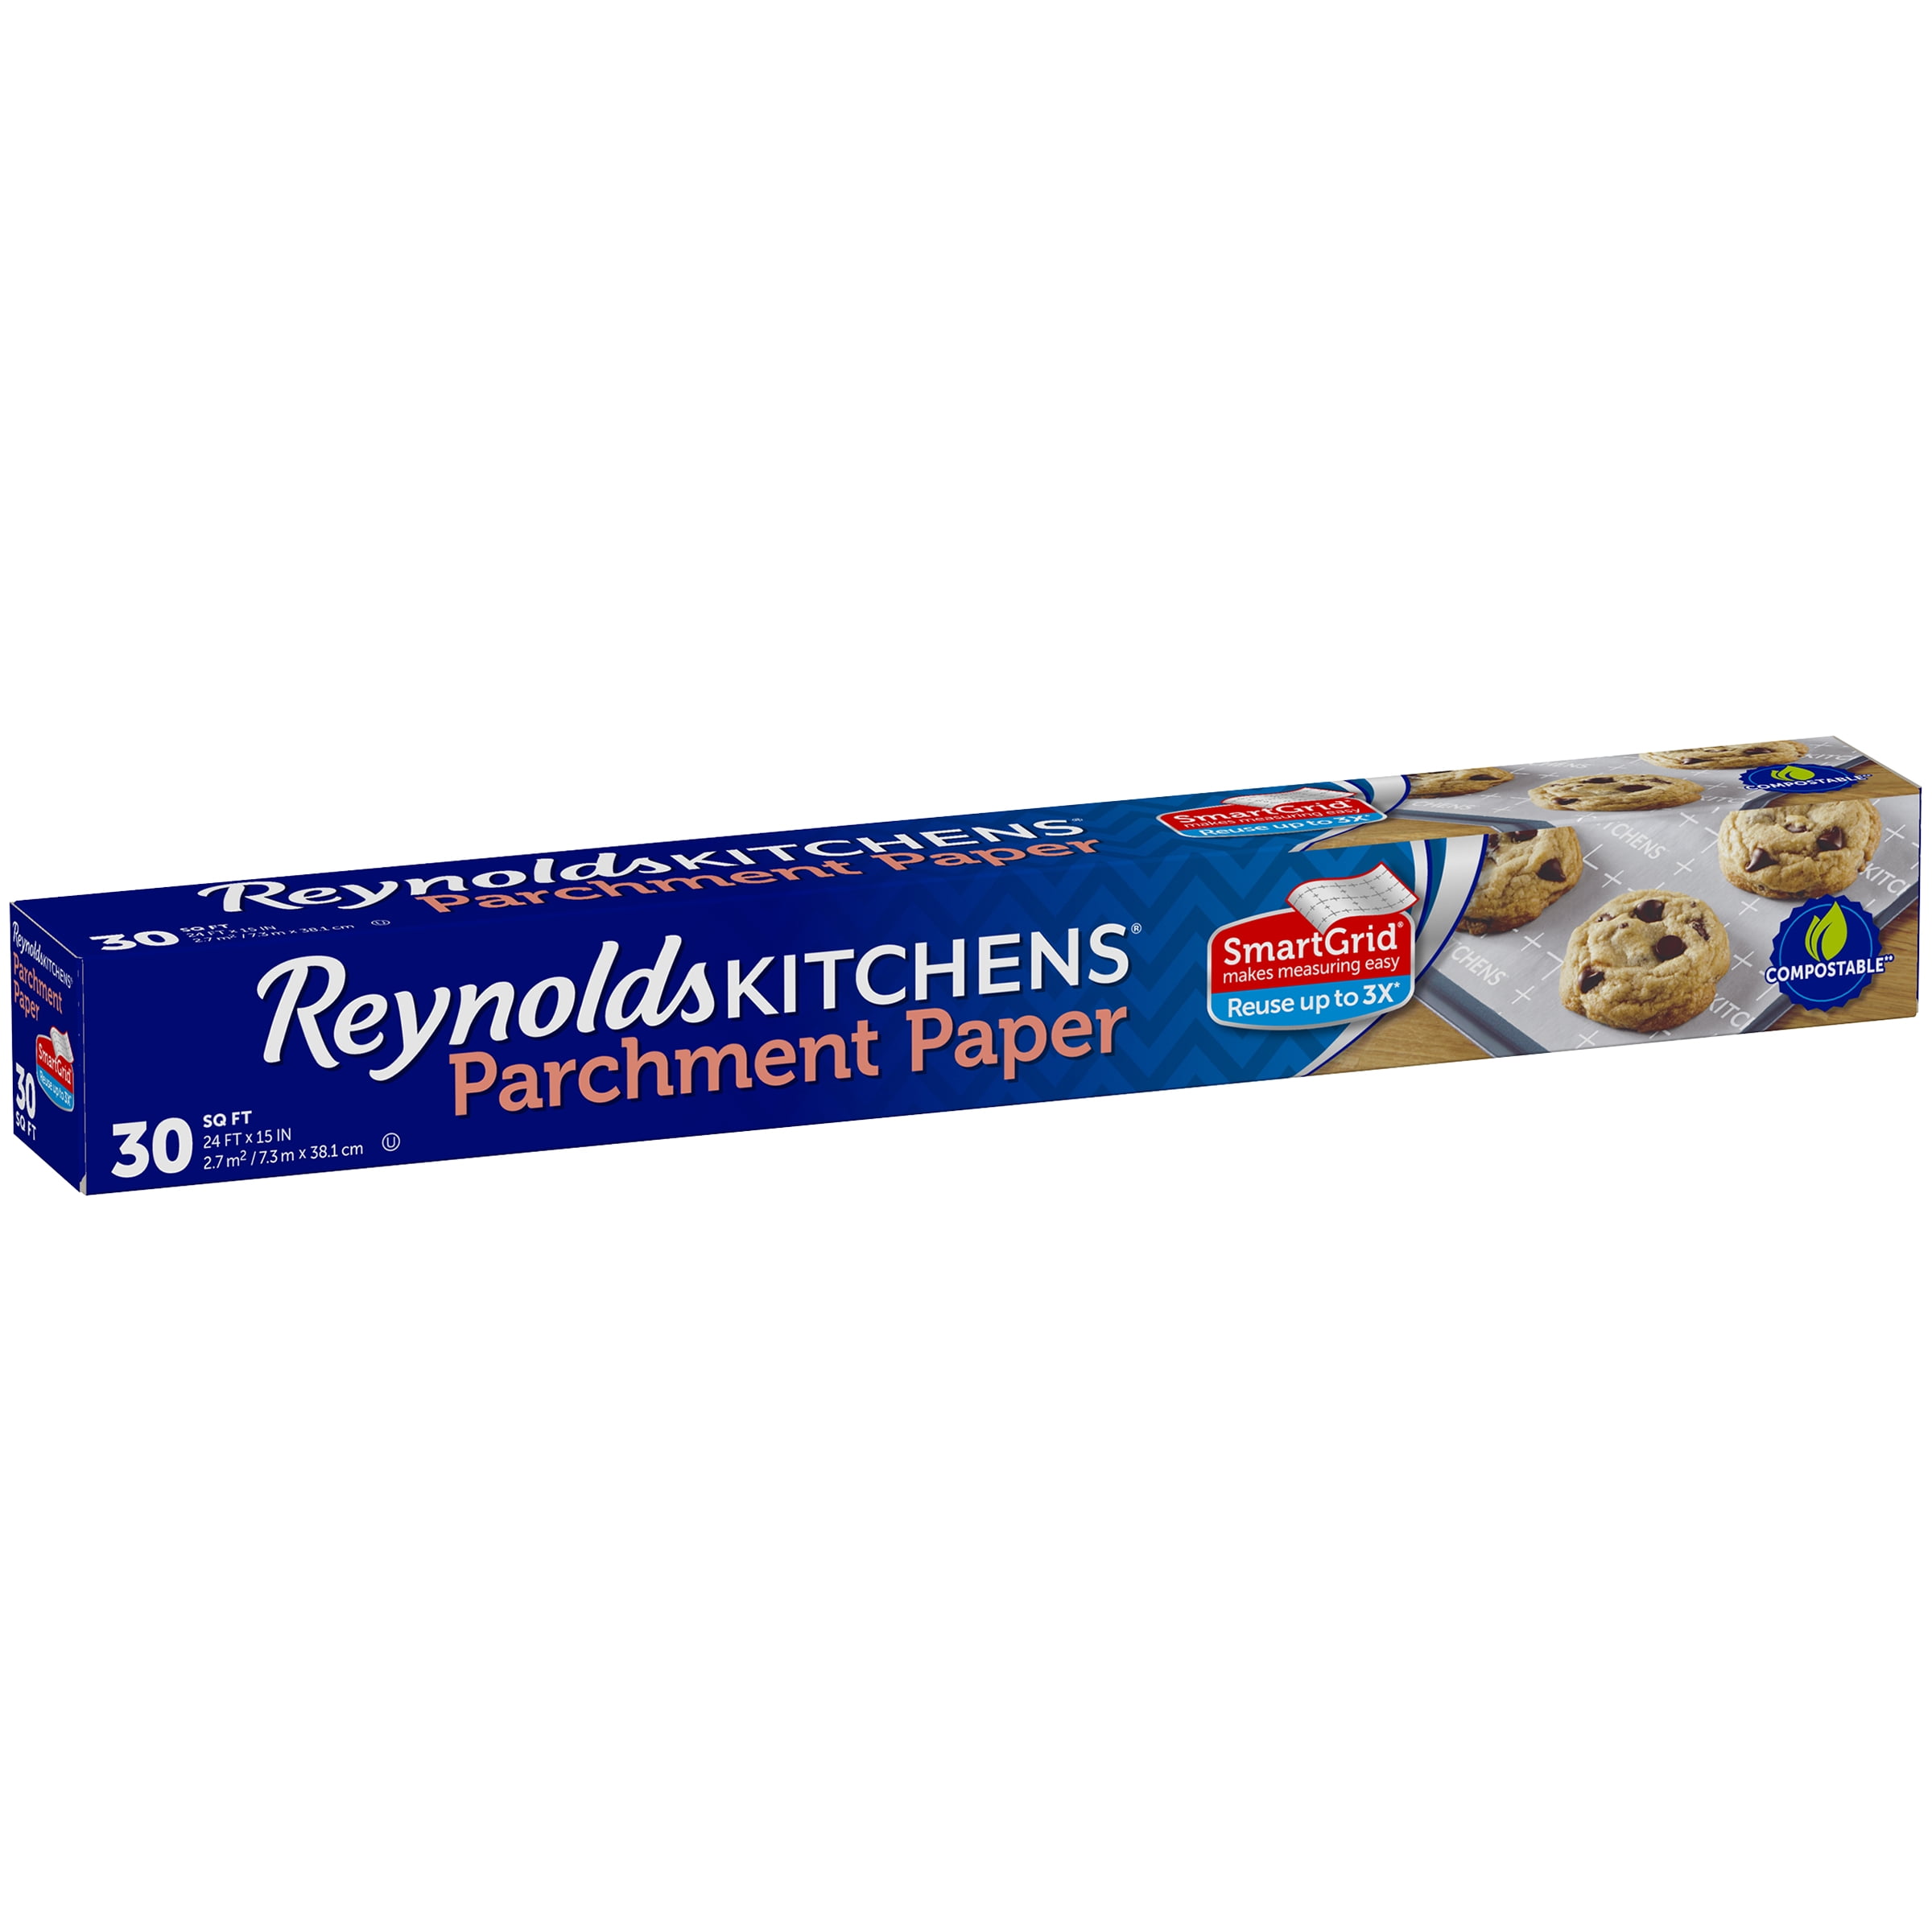 45 Square Feet Reynolds Kitchens Parchment Paper Roll with SmartGrid 